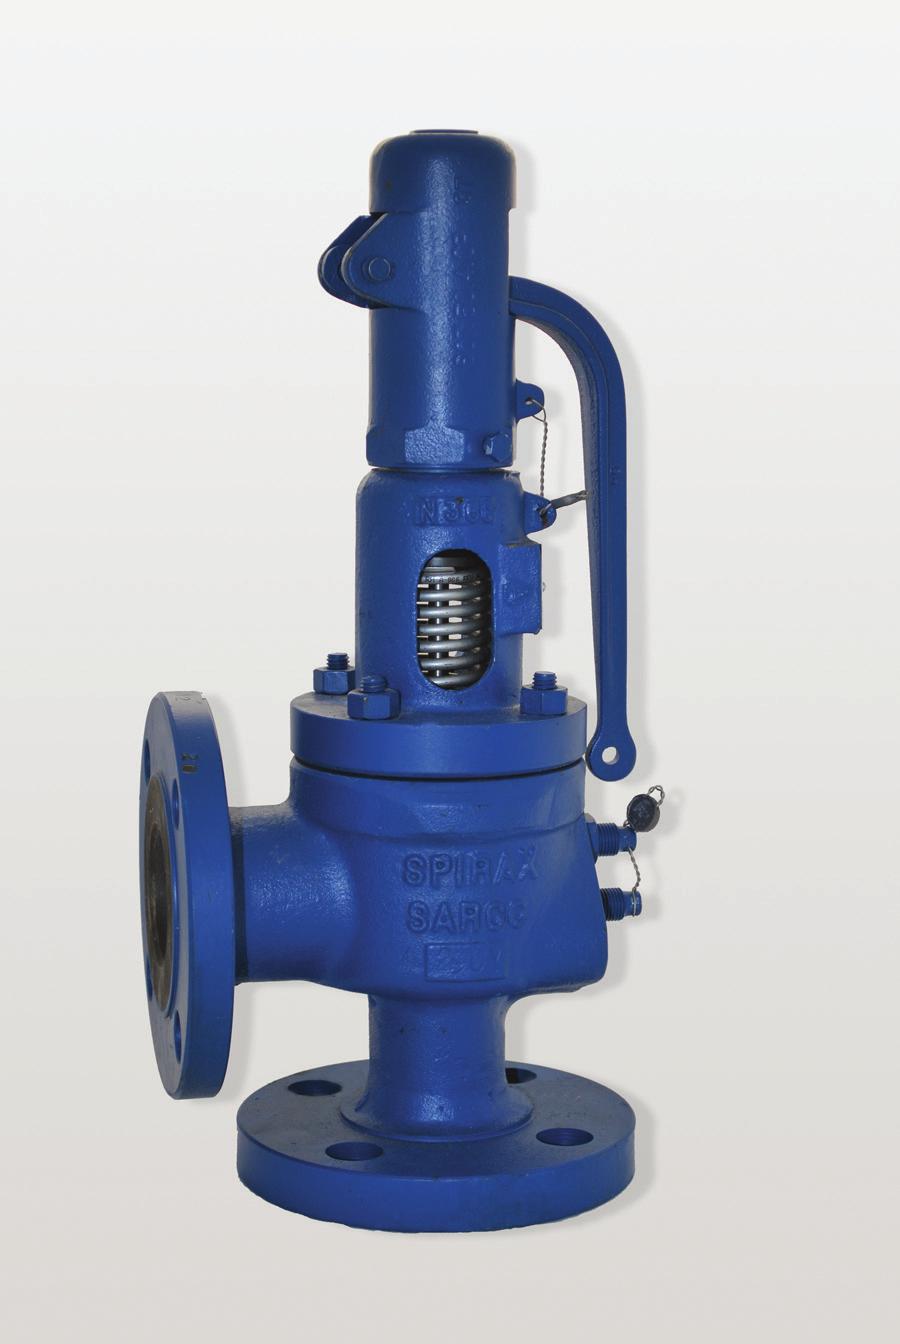 s a f e t y v a l v e s o l u t i o n s Product range safety valves for steam and air applications Clean service valves Type Product Sizes Steam and Air 3 and 4 semi-nozzle ASME safety valve 1½" X